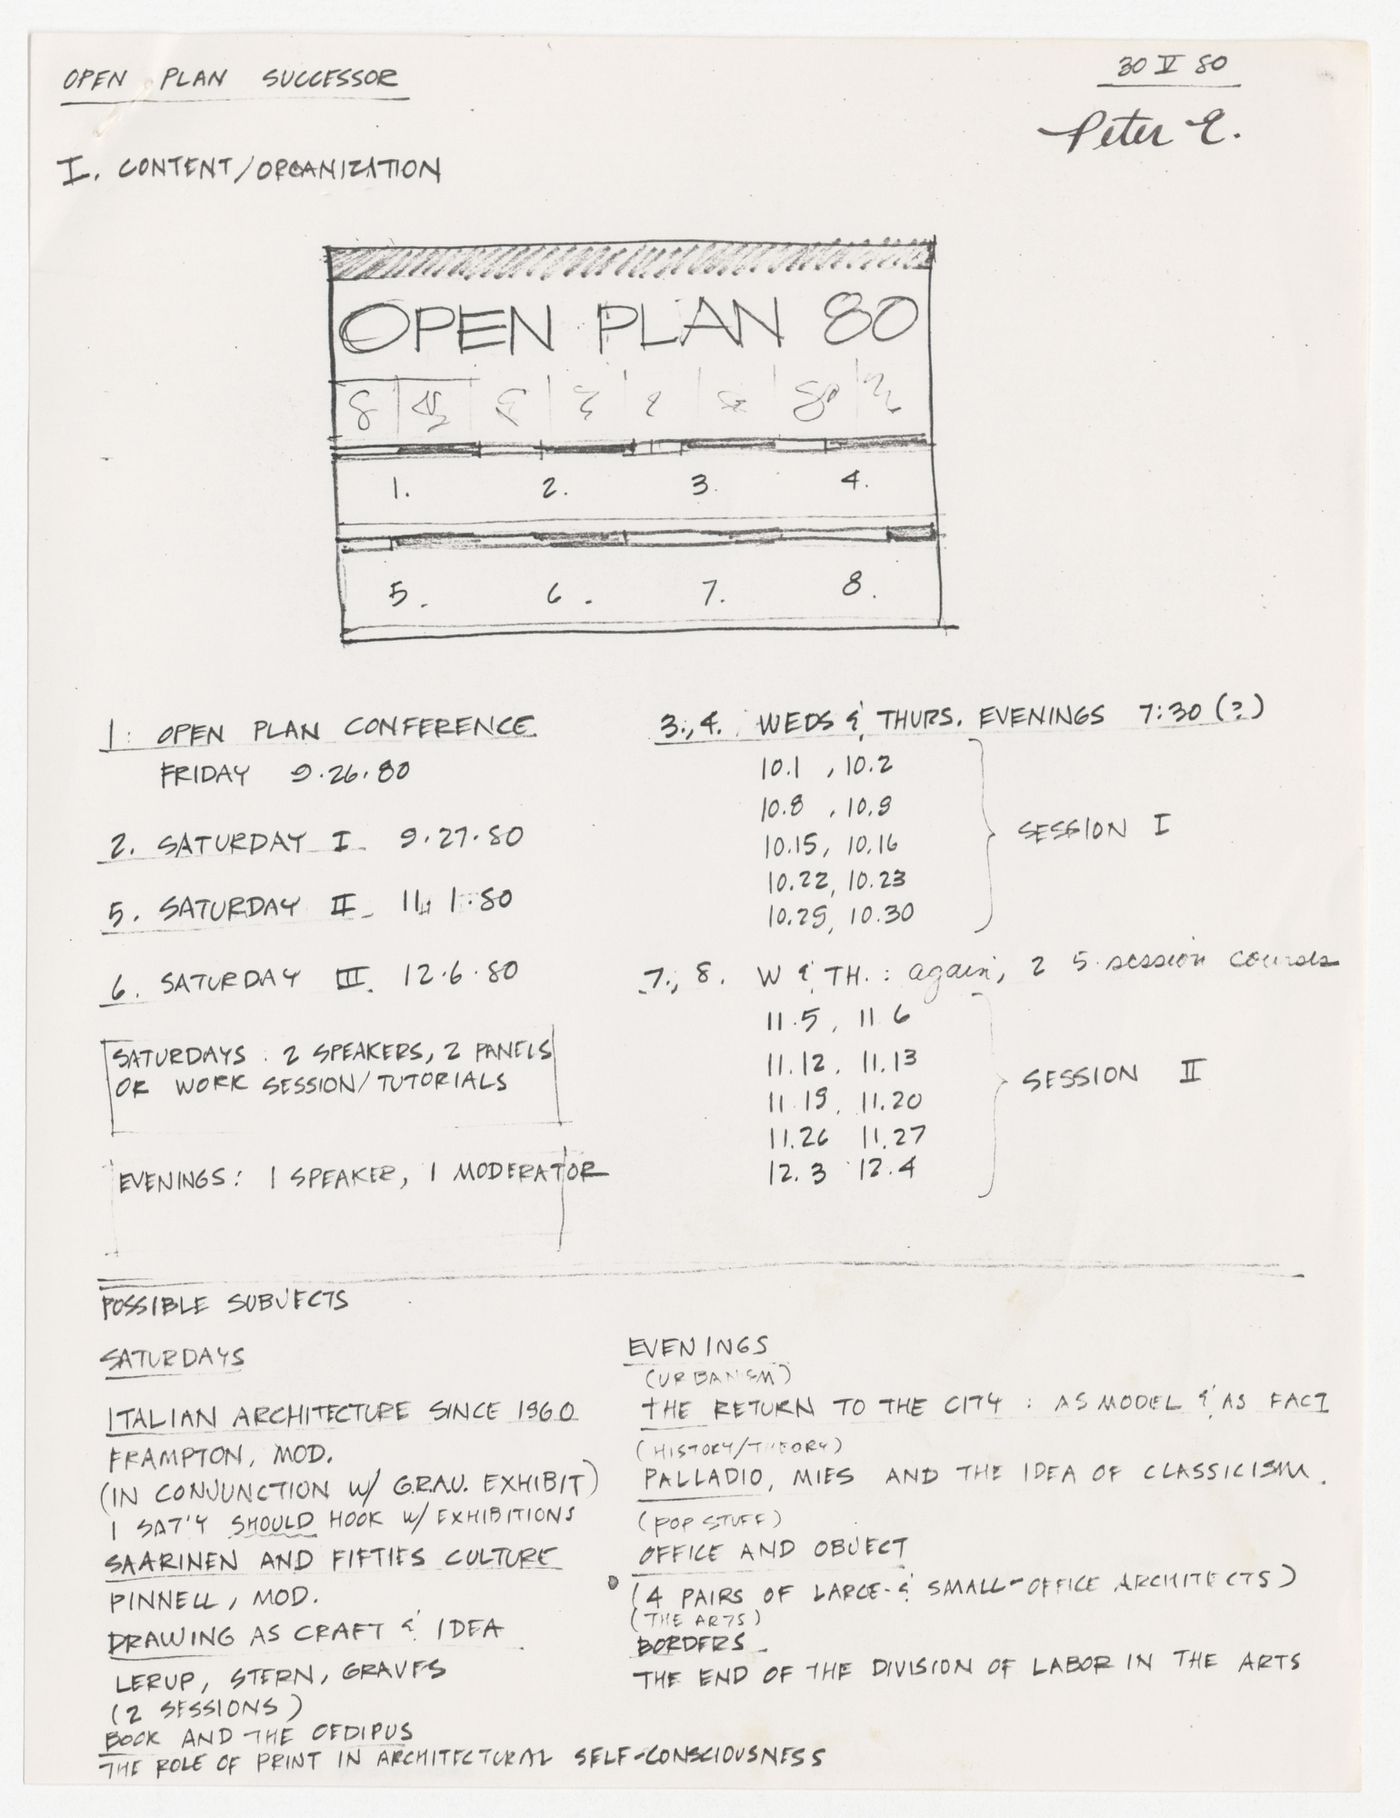 Notes for Open Plan successor